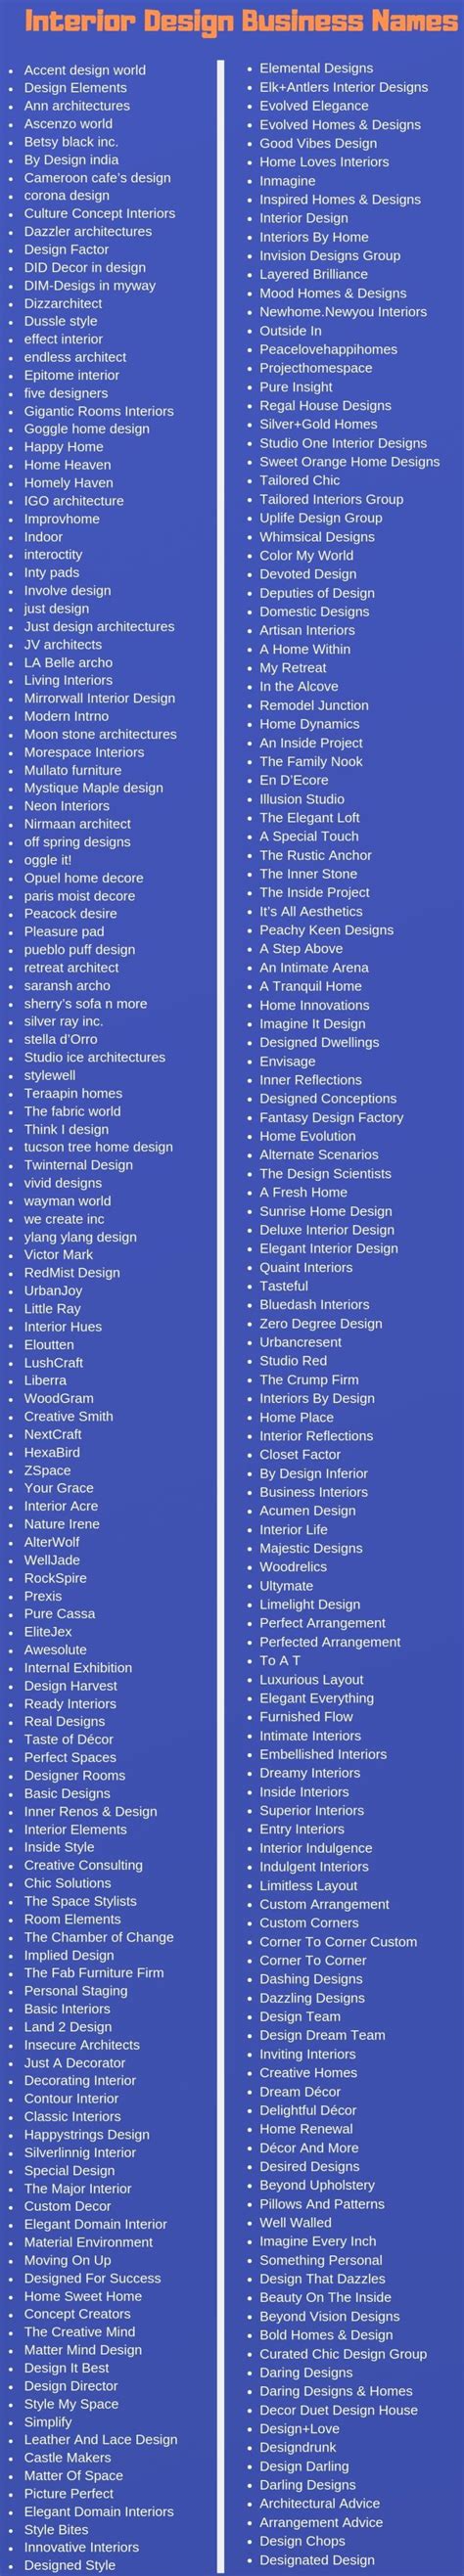 370 Interior Design Business Names Ideas And Suggestions